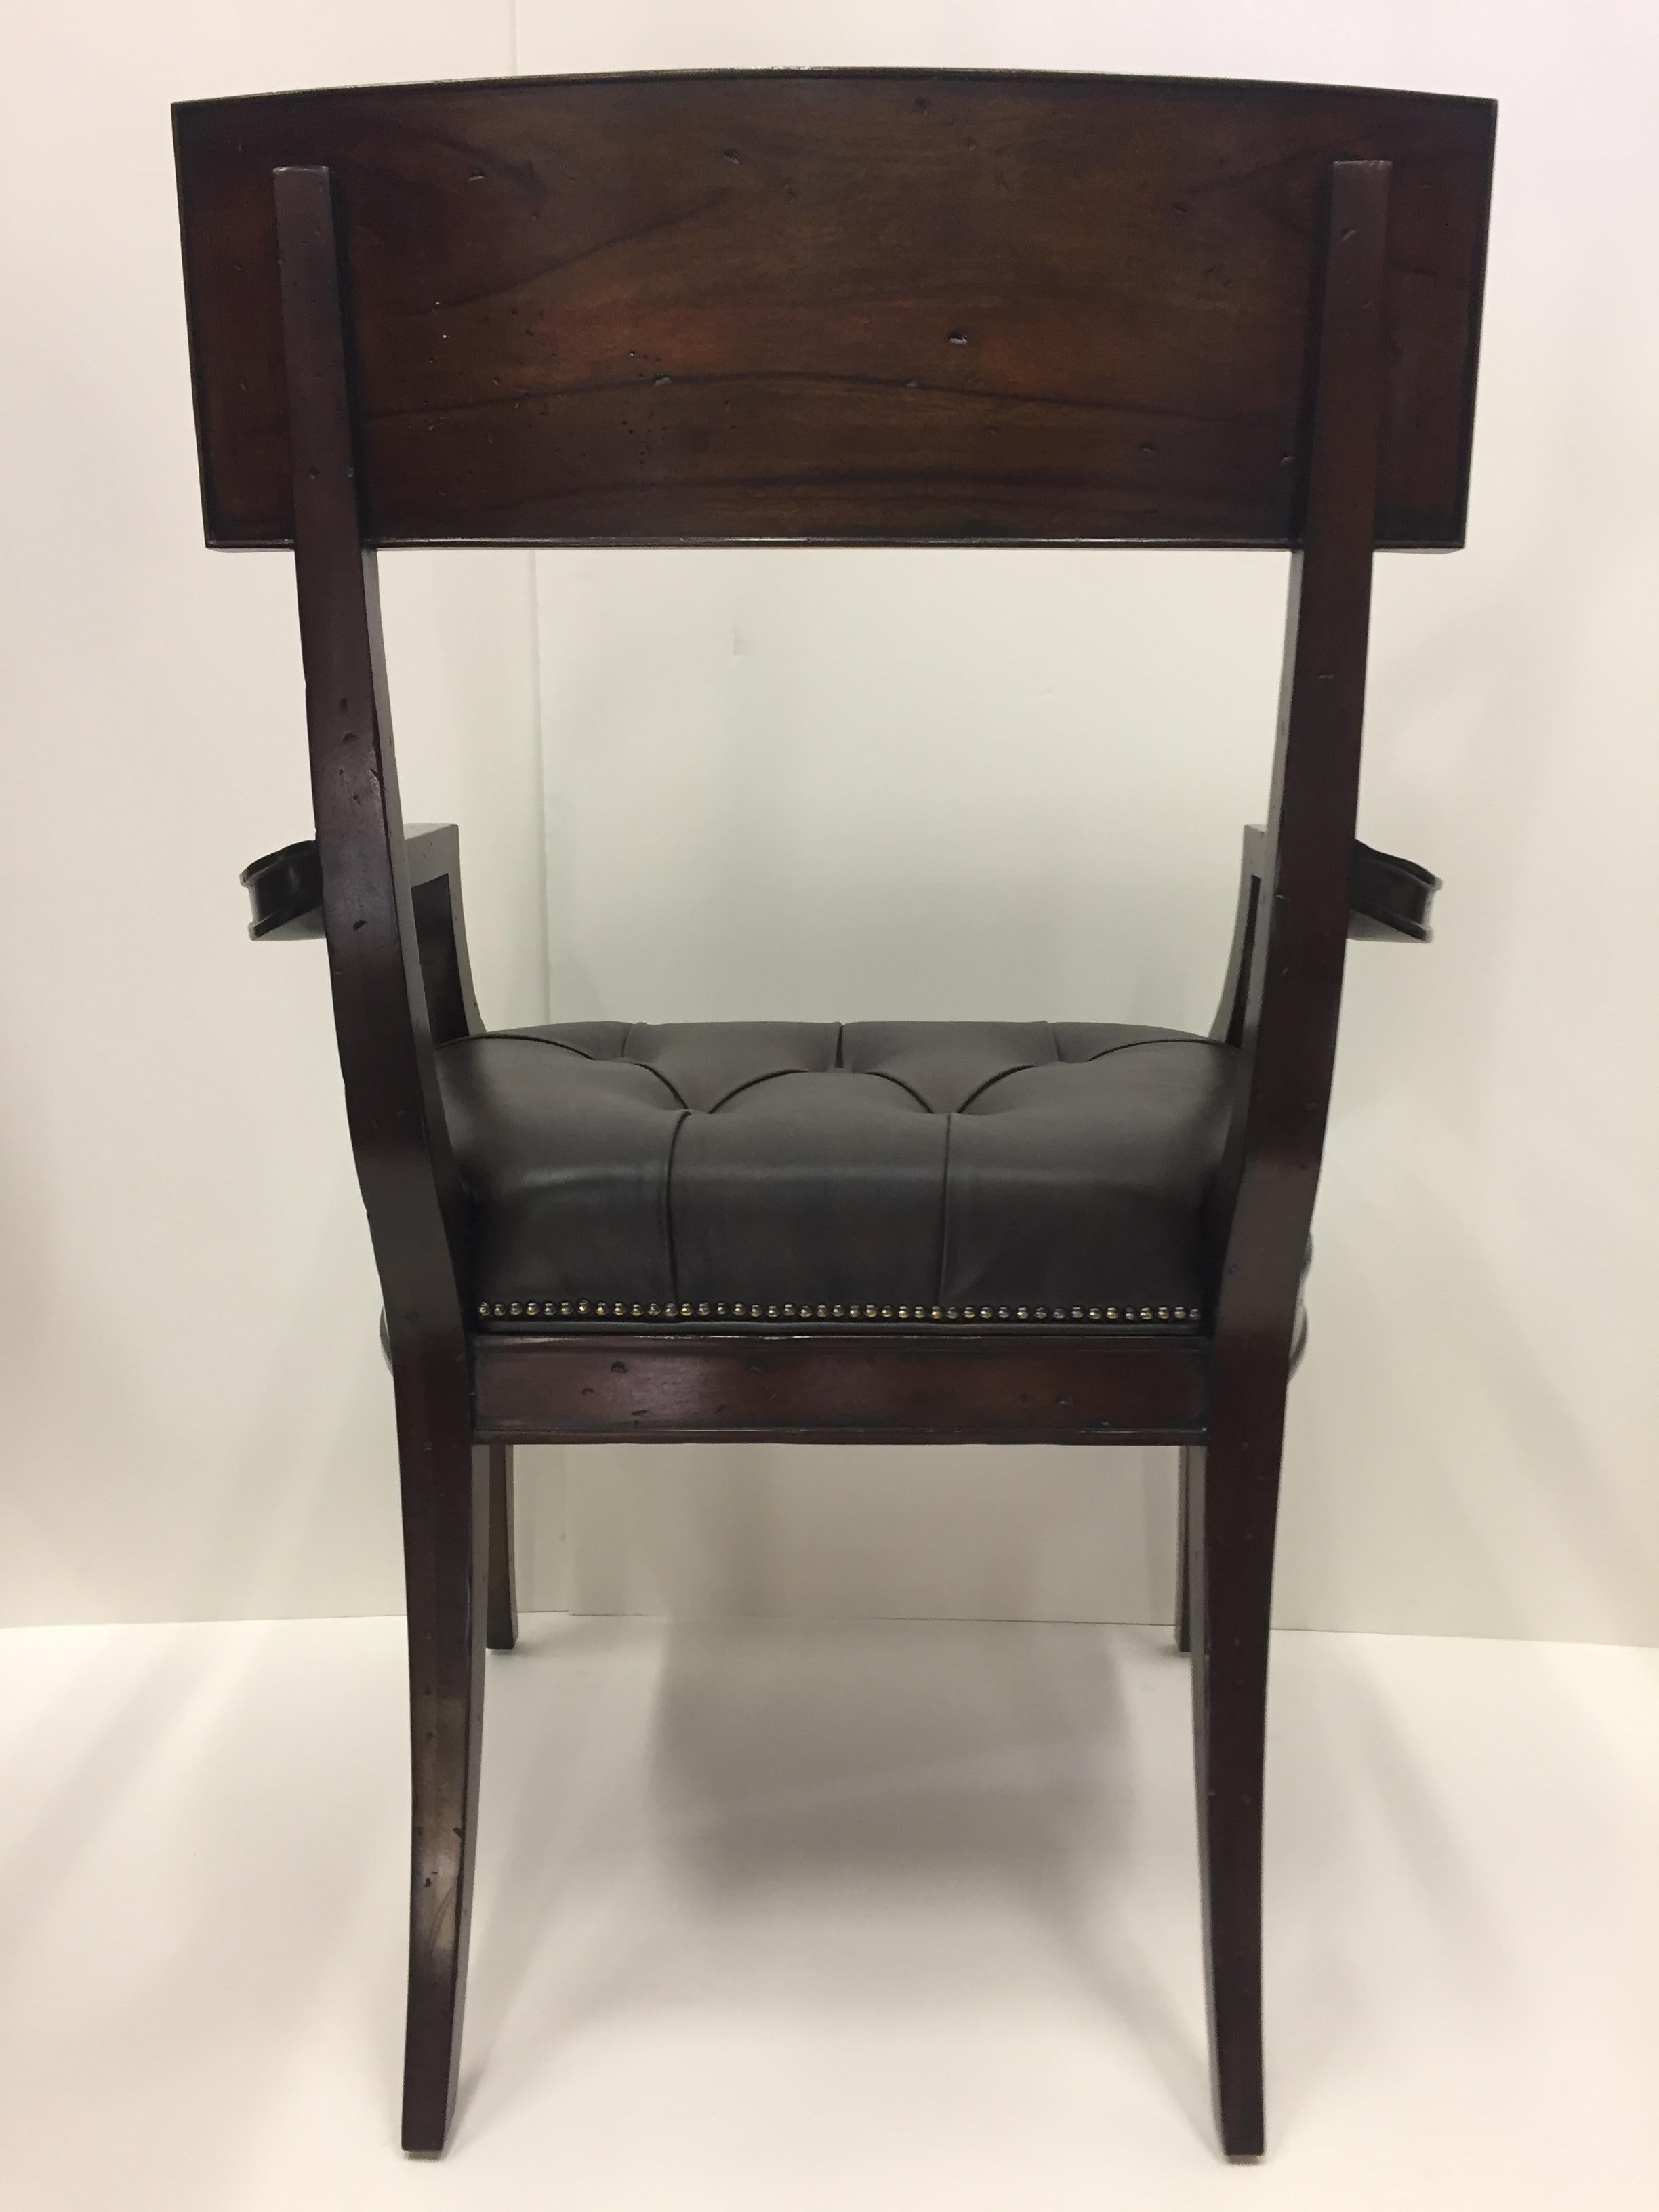 Regency Style Mahogany and Tufted Leather Armchair In Excellent Condition For Sale In Hopewell, NJ